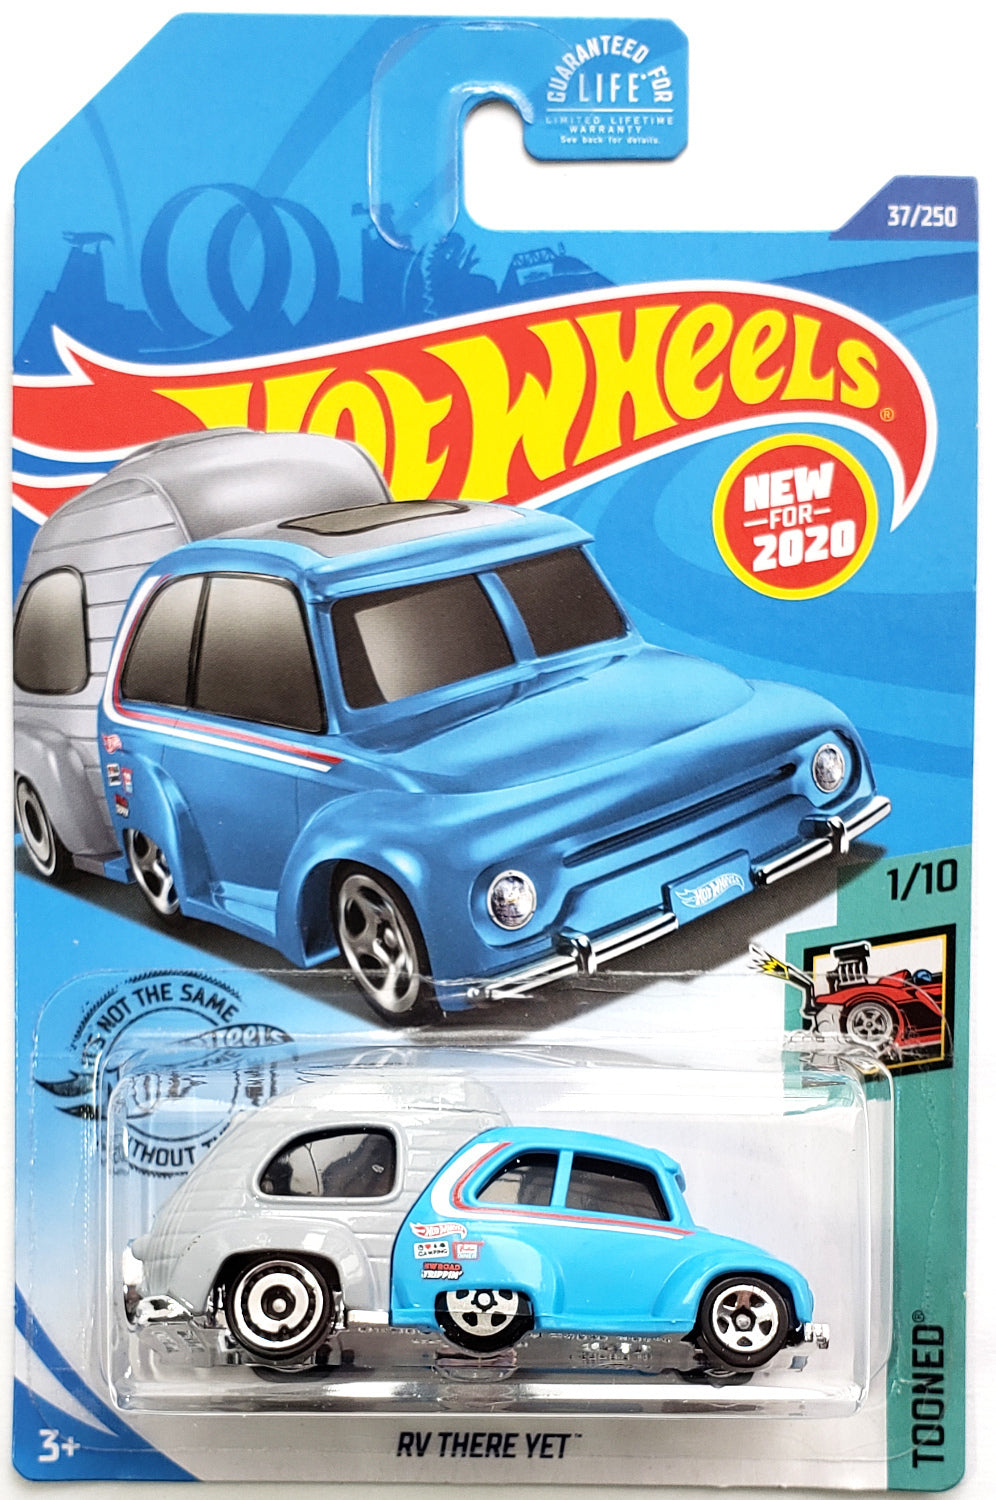 Hot Wheels 2020 - Collector # 037/250 - Tooned 1/10 - New Models - RV There Yet - Blue & Gray